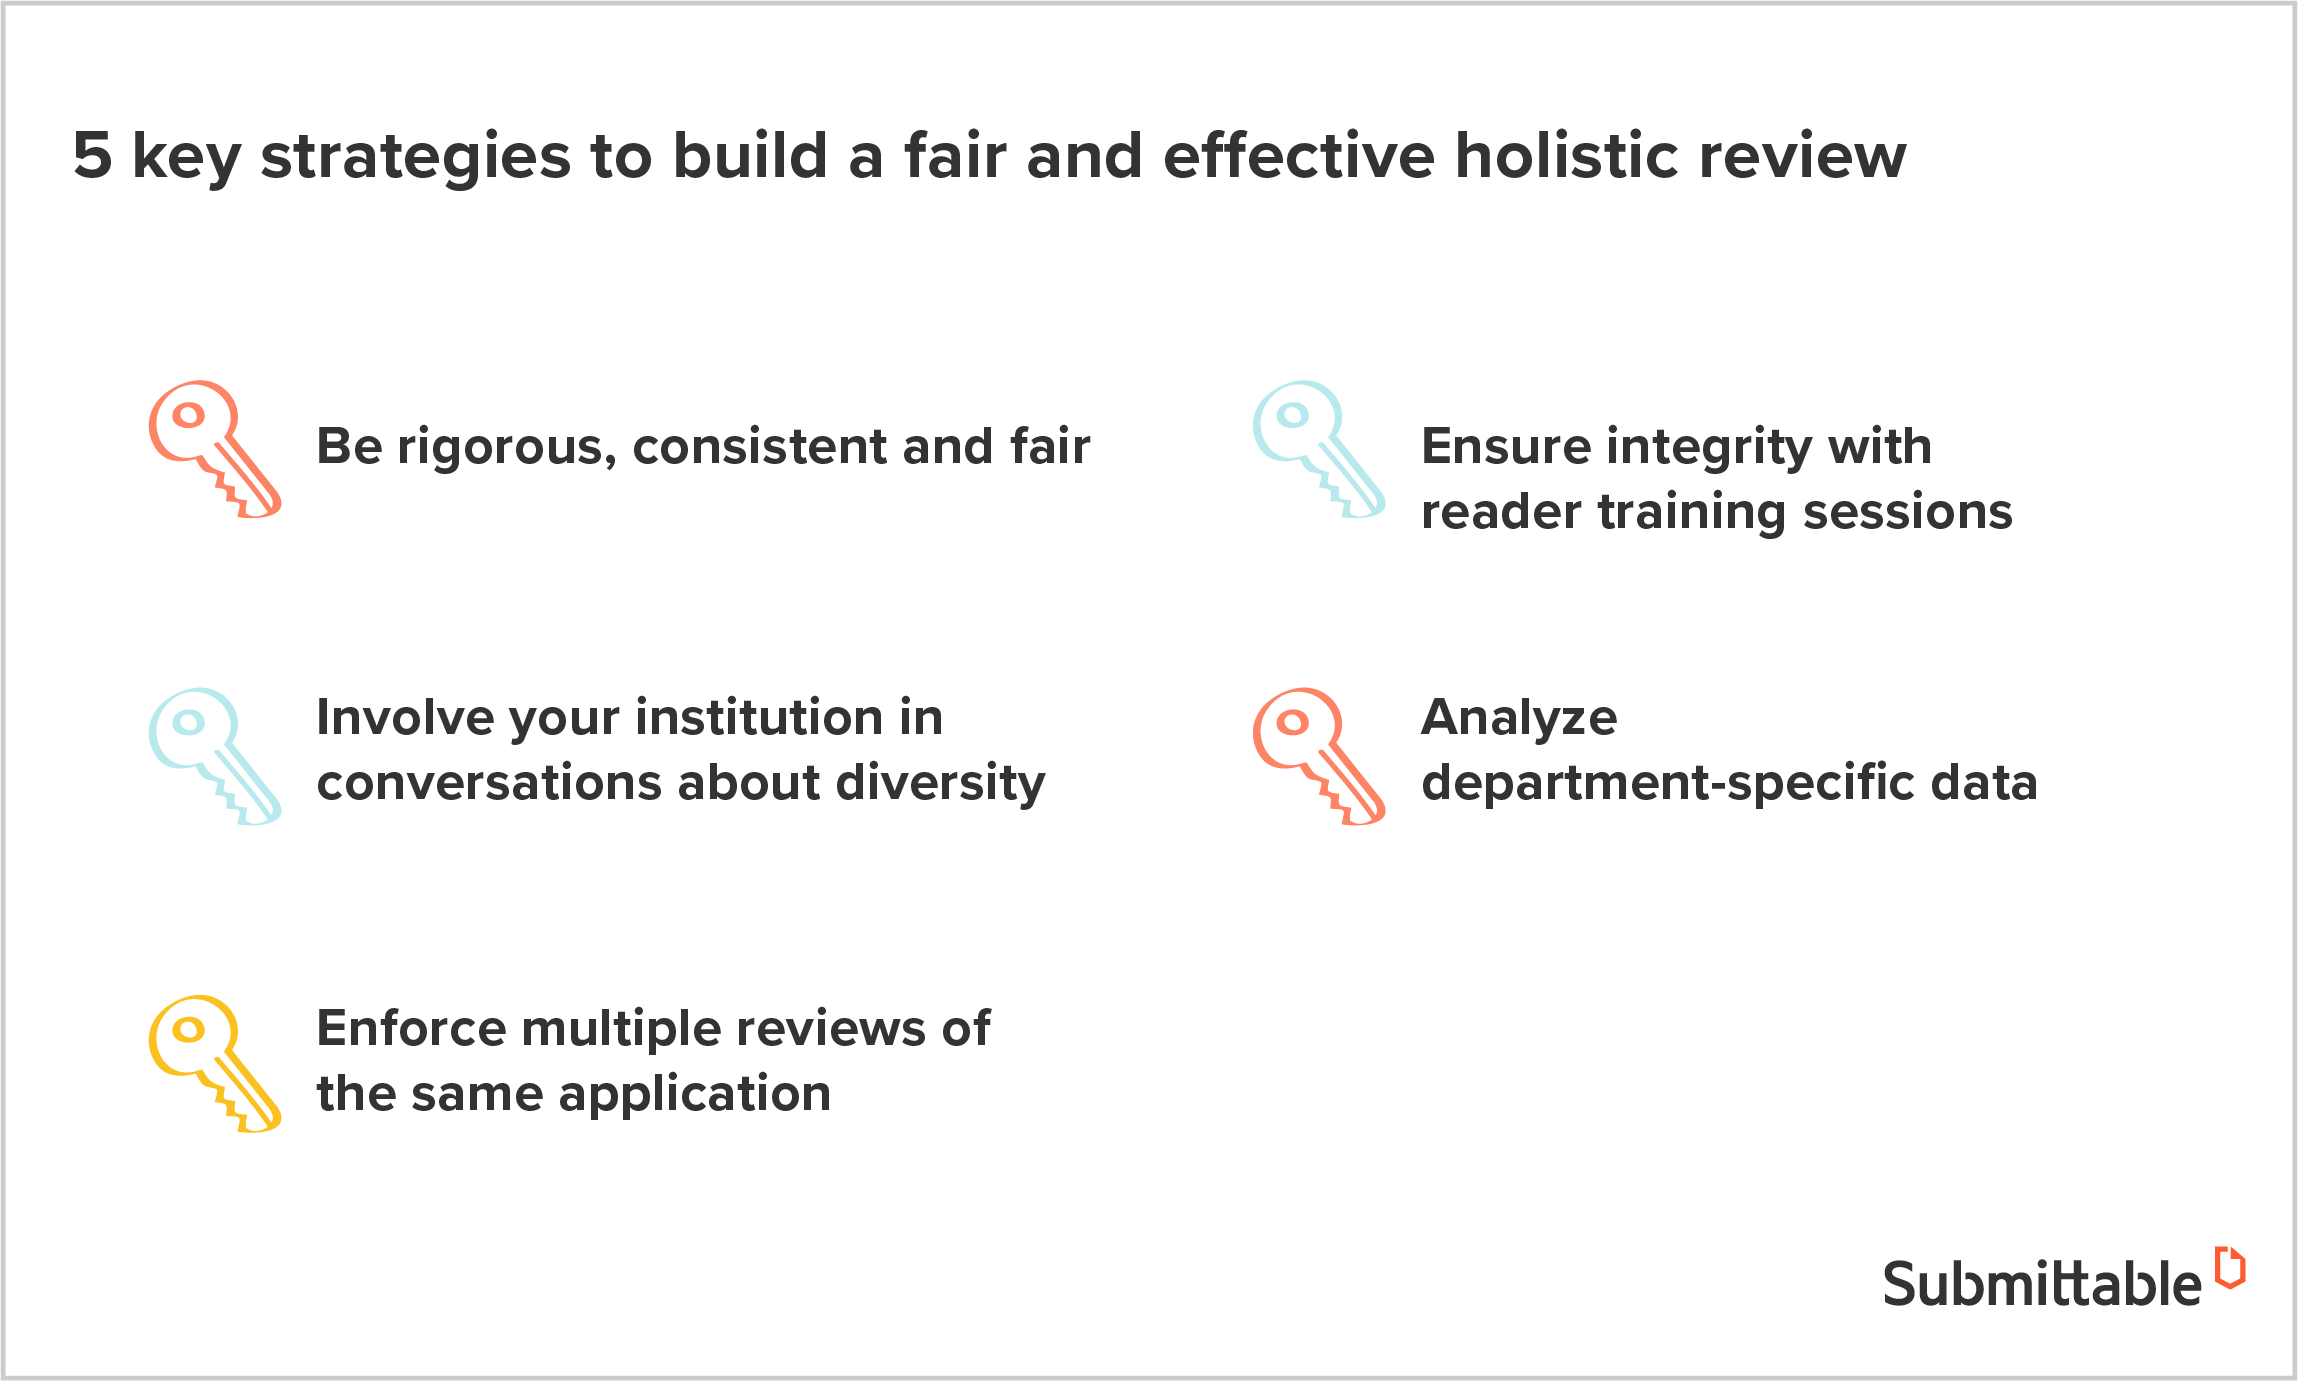 Building a fair and effective holistic review process